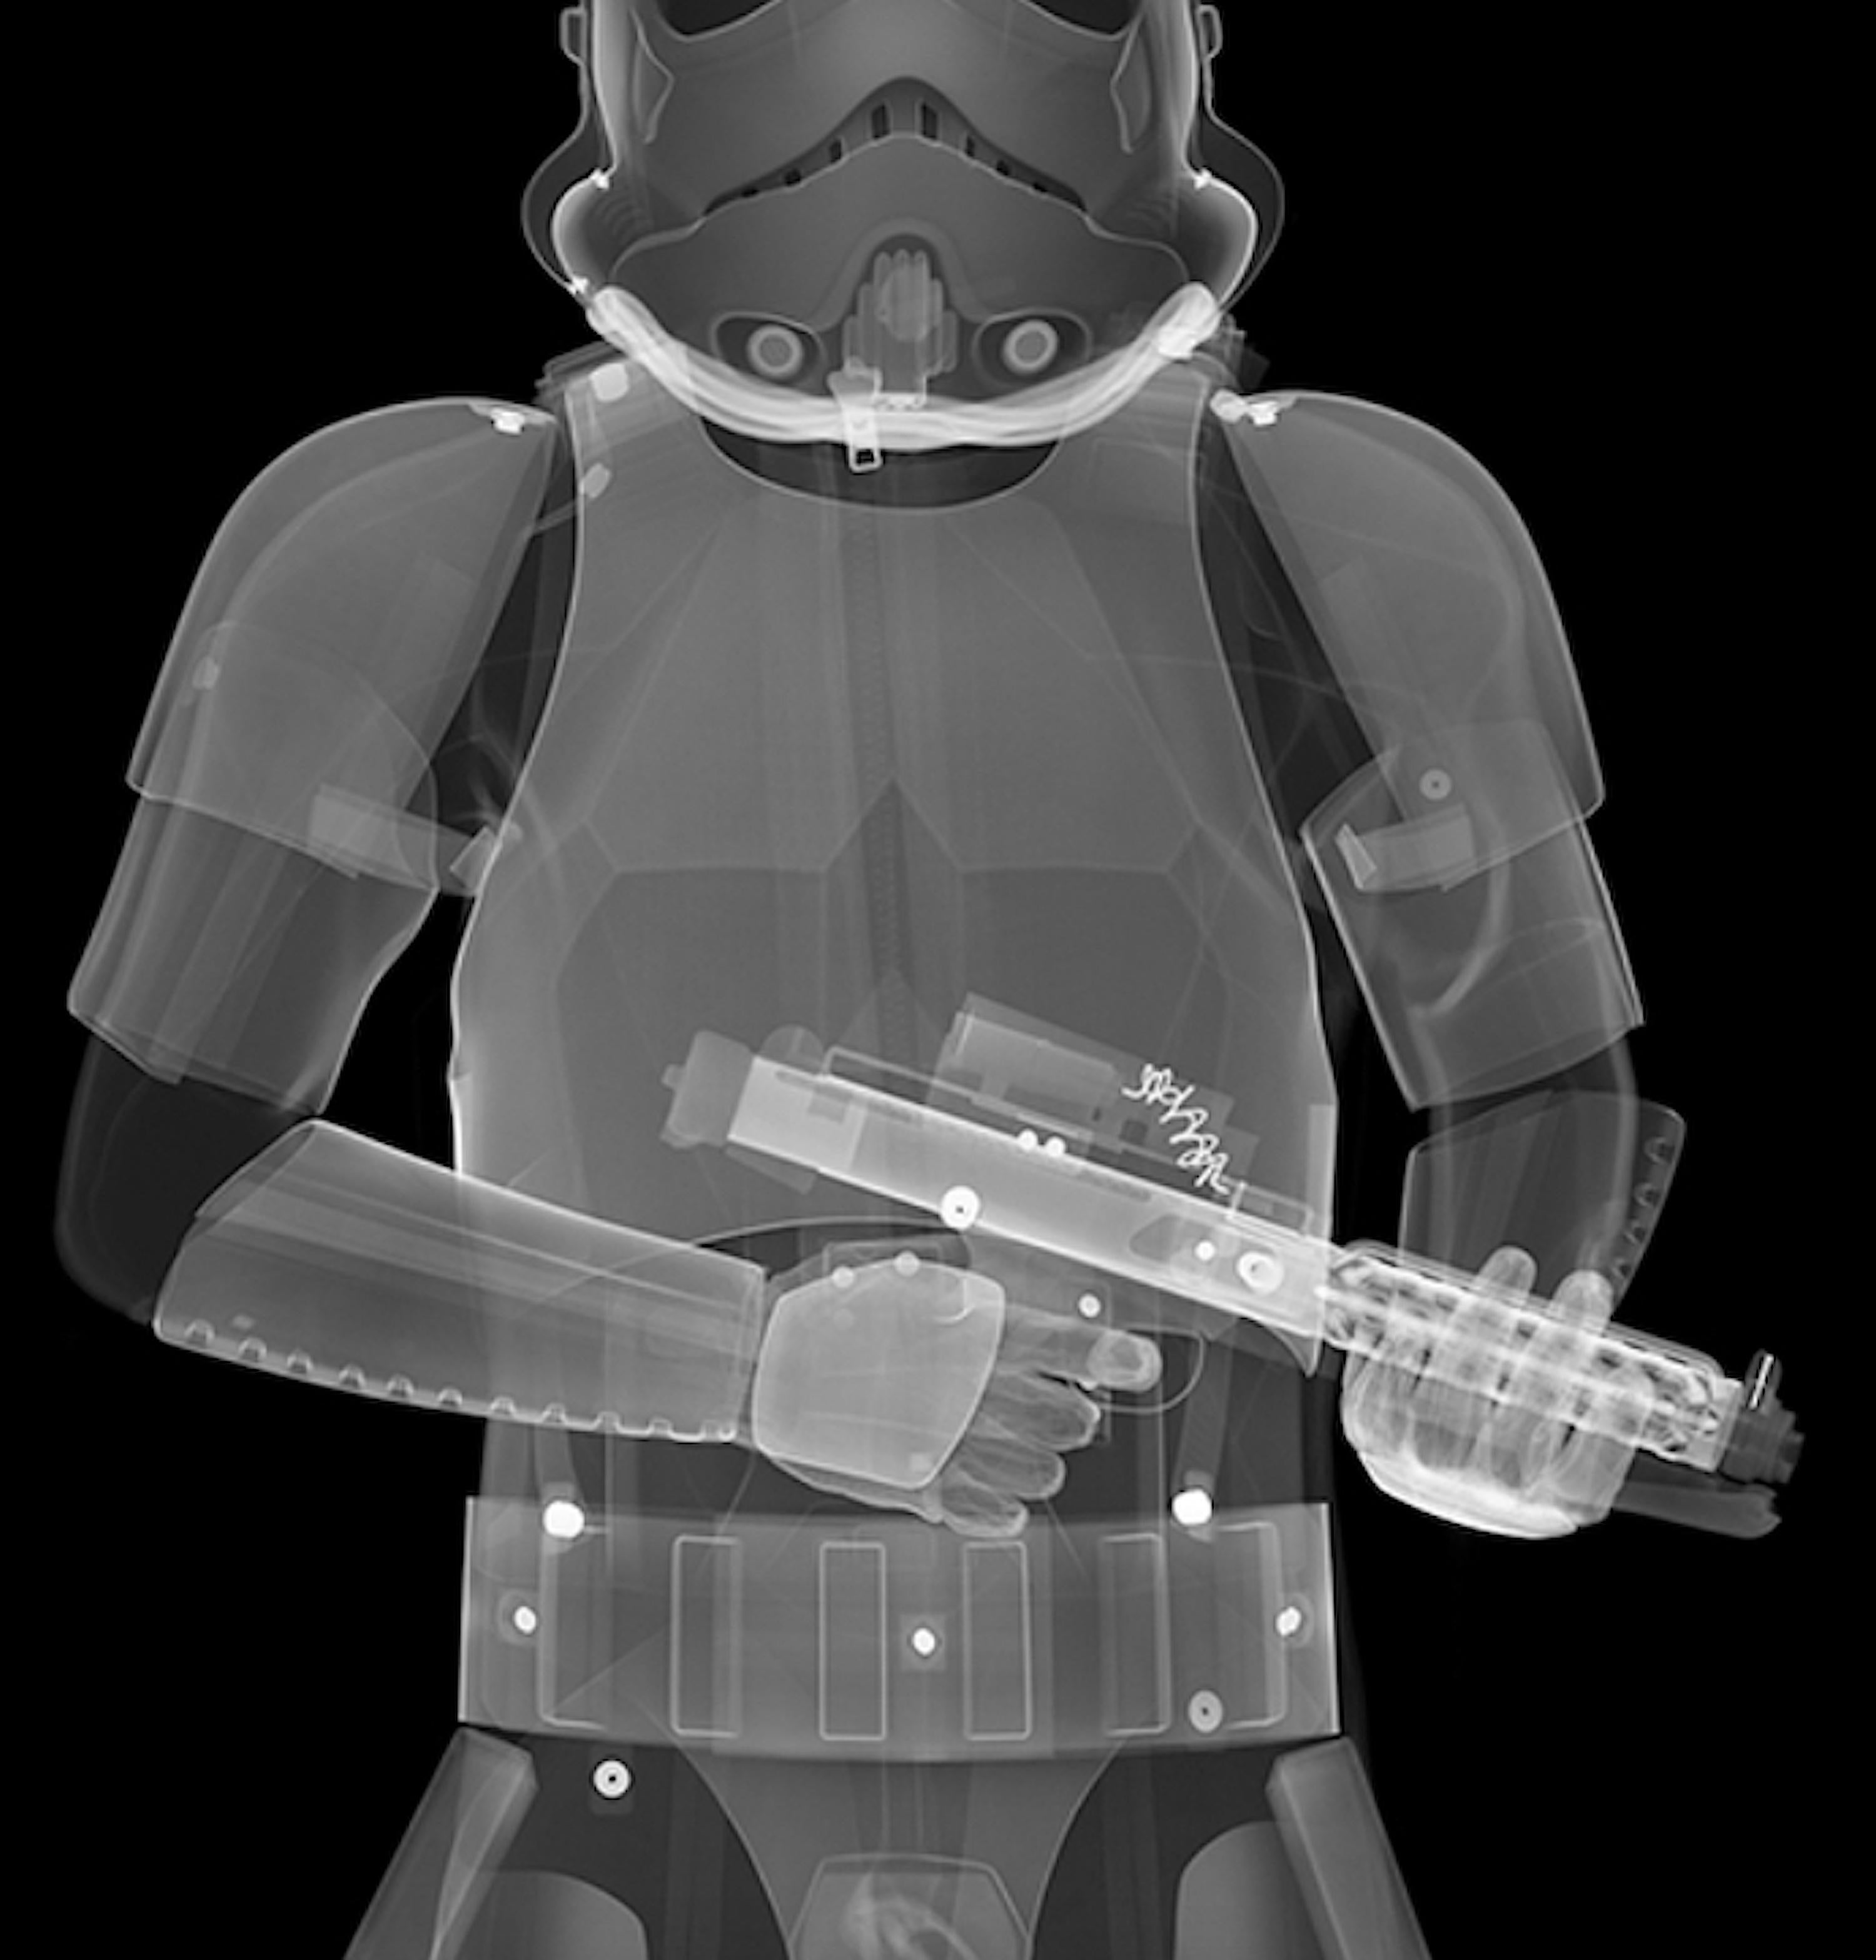 X-Ray StormTrooper with plexiglas face mounted on dibond - Photograph by Nick Veasey